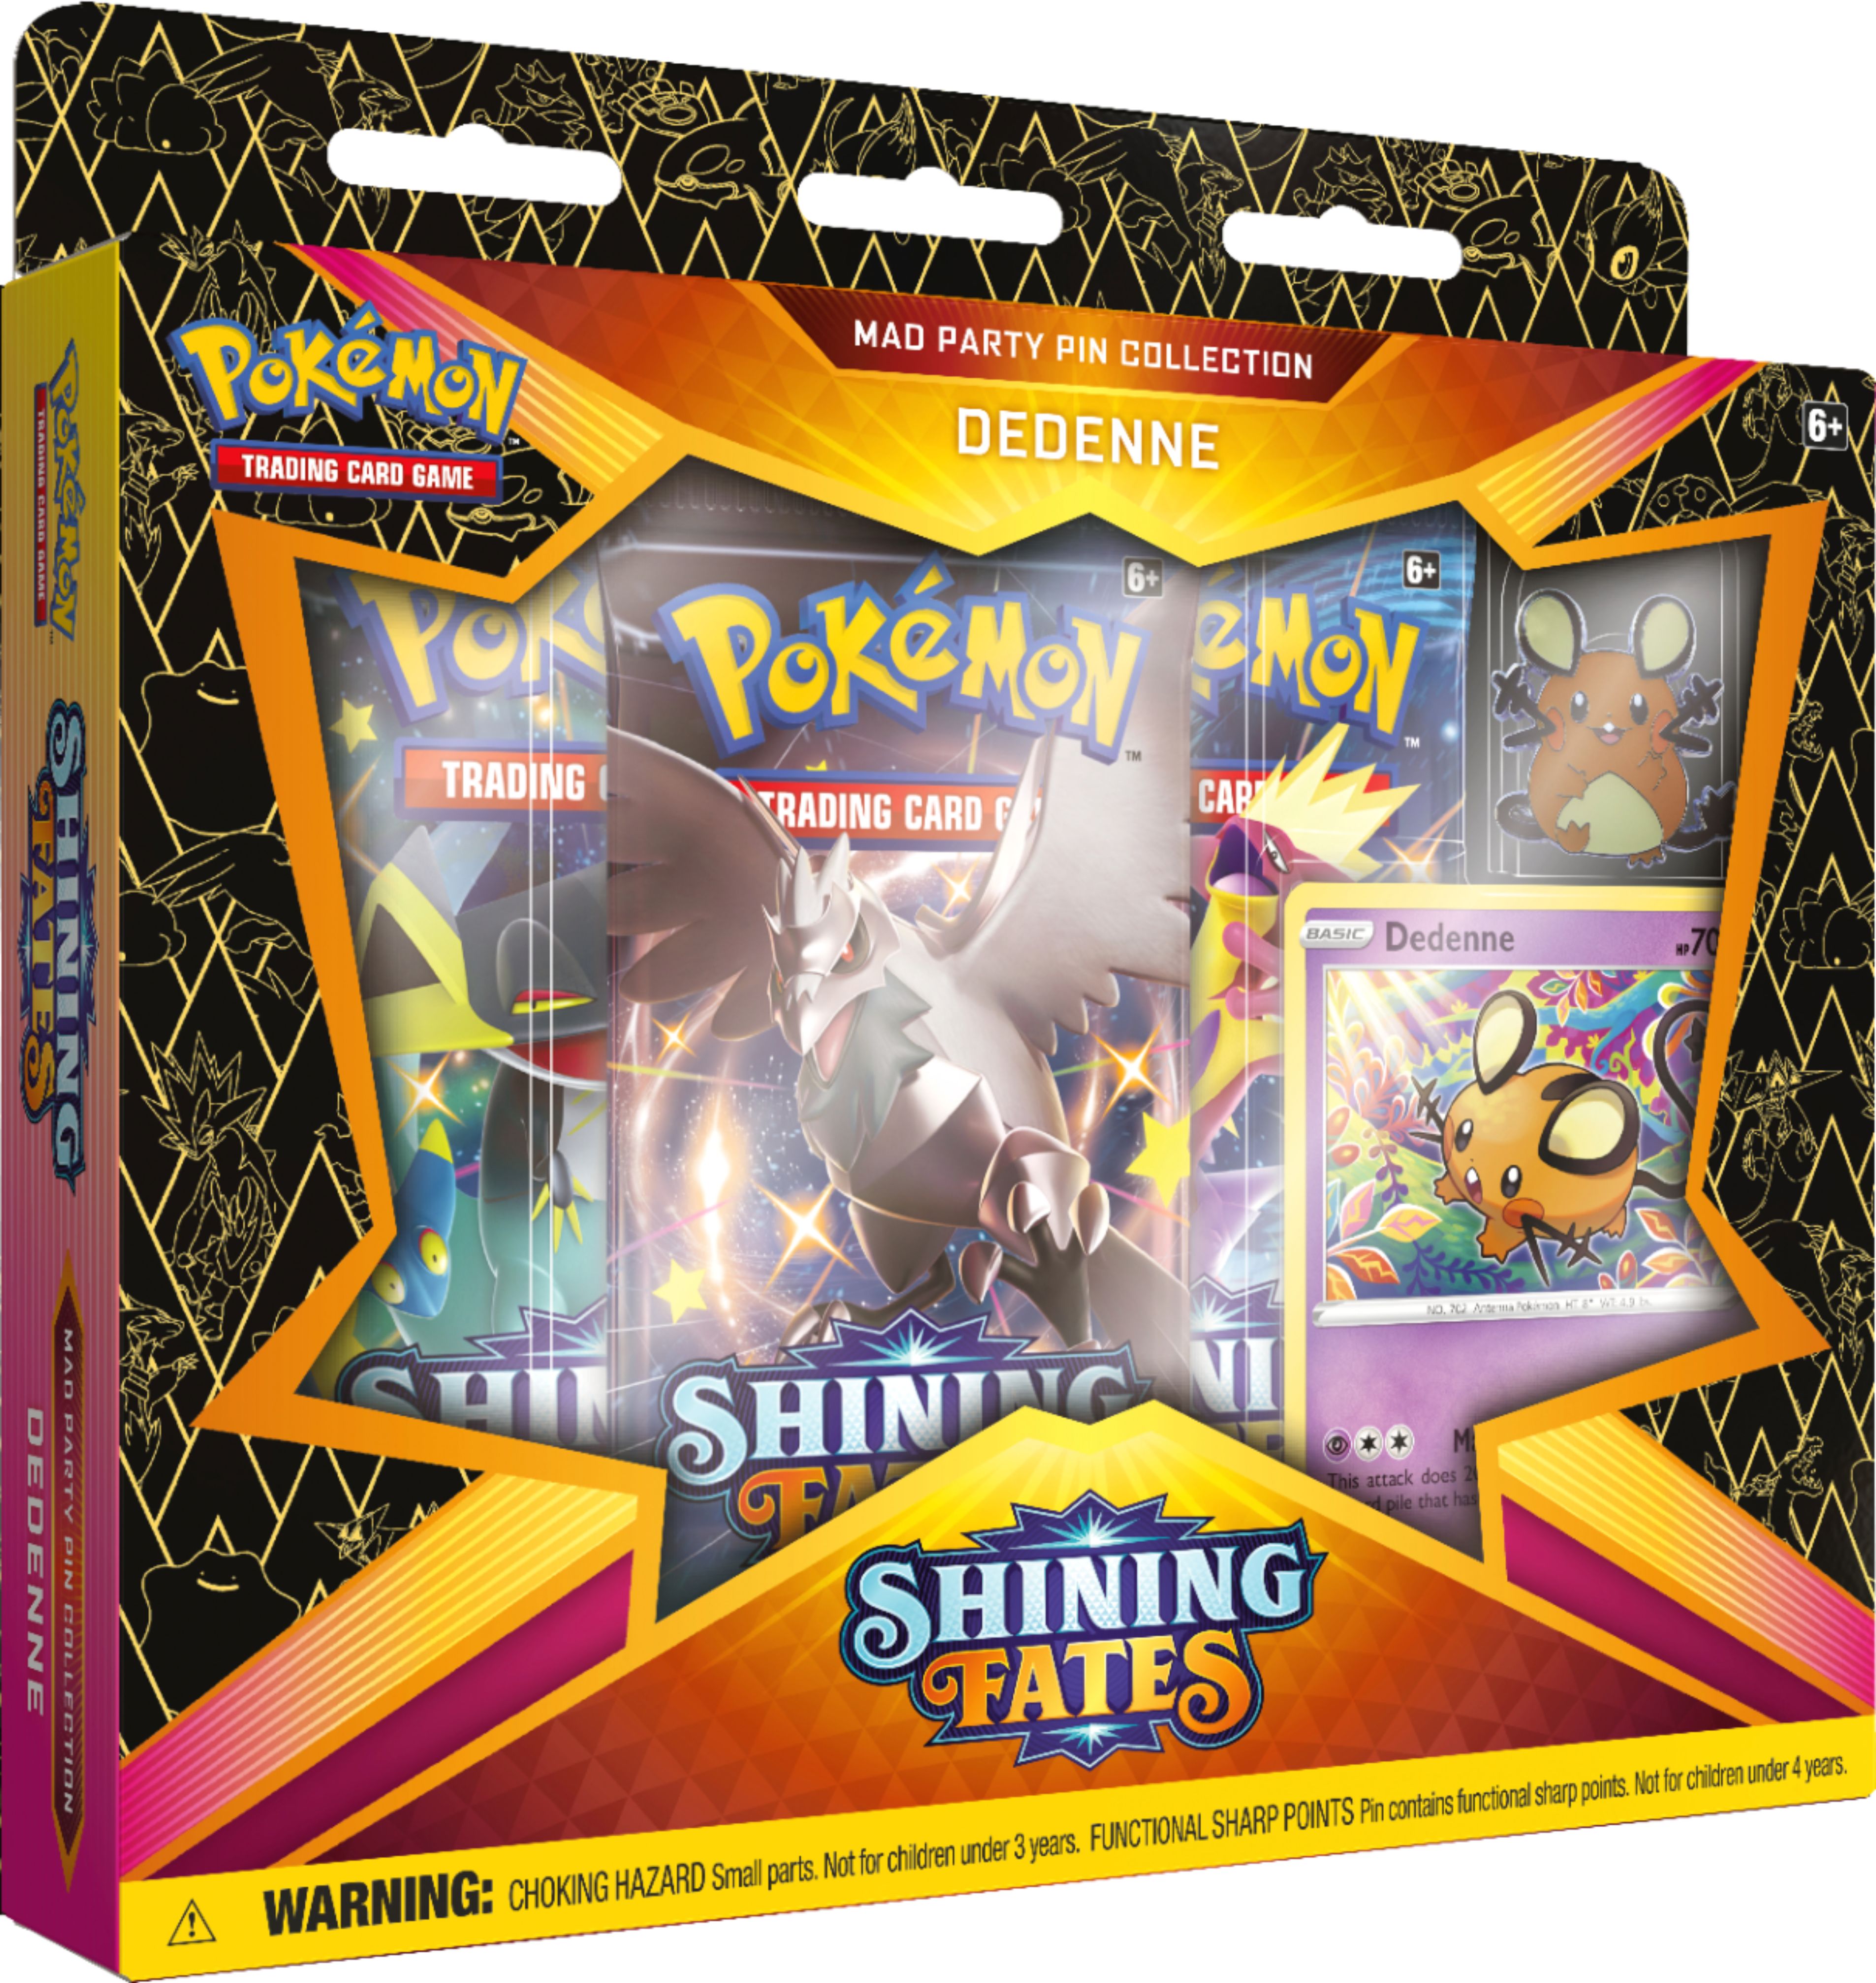 Pokemon TCG Shining Fates Mad Party Pin Collection Dedenne 